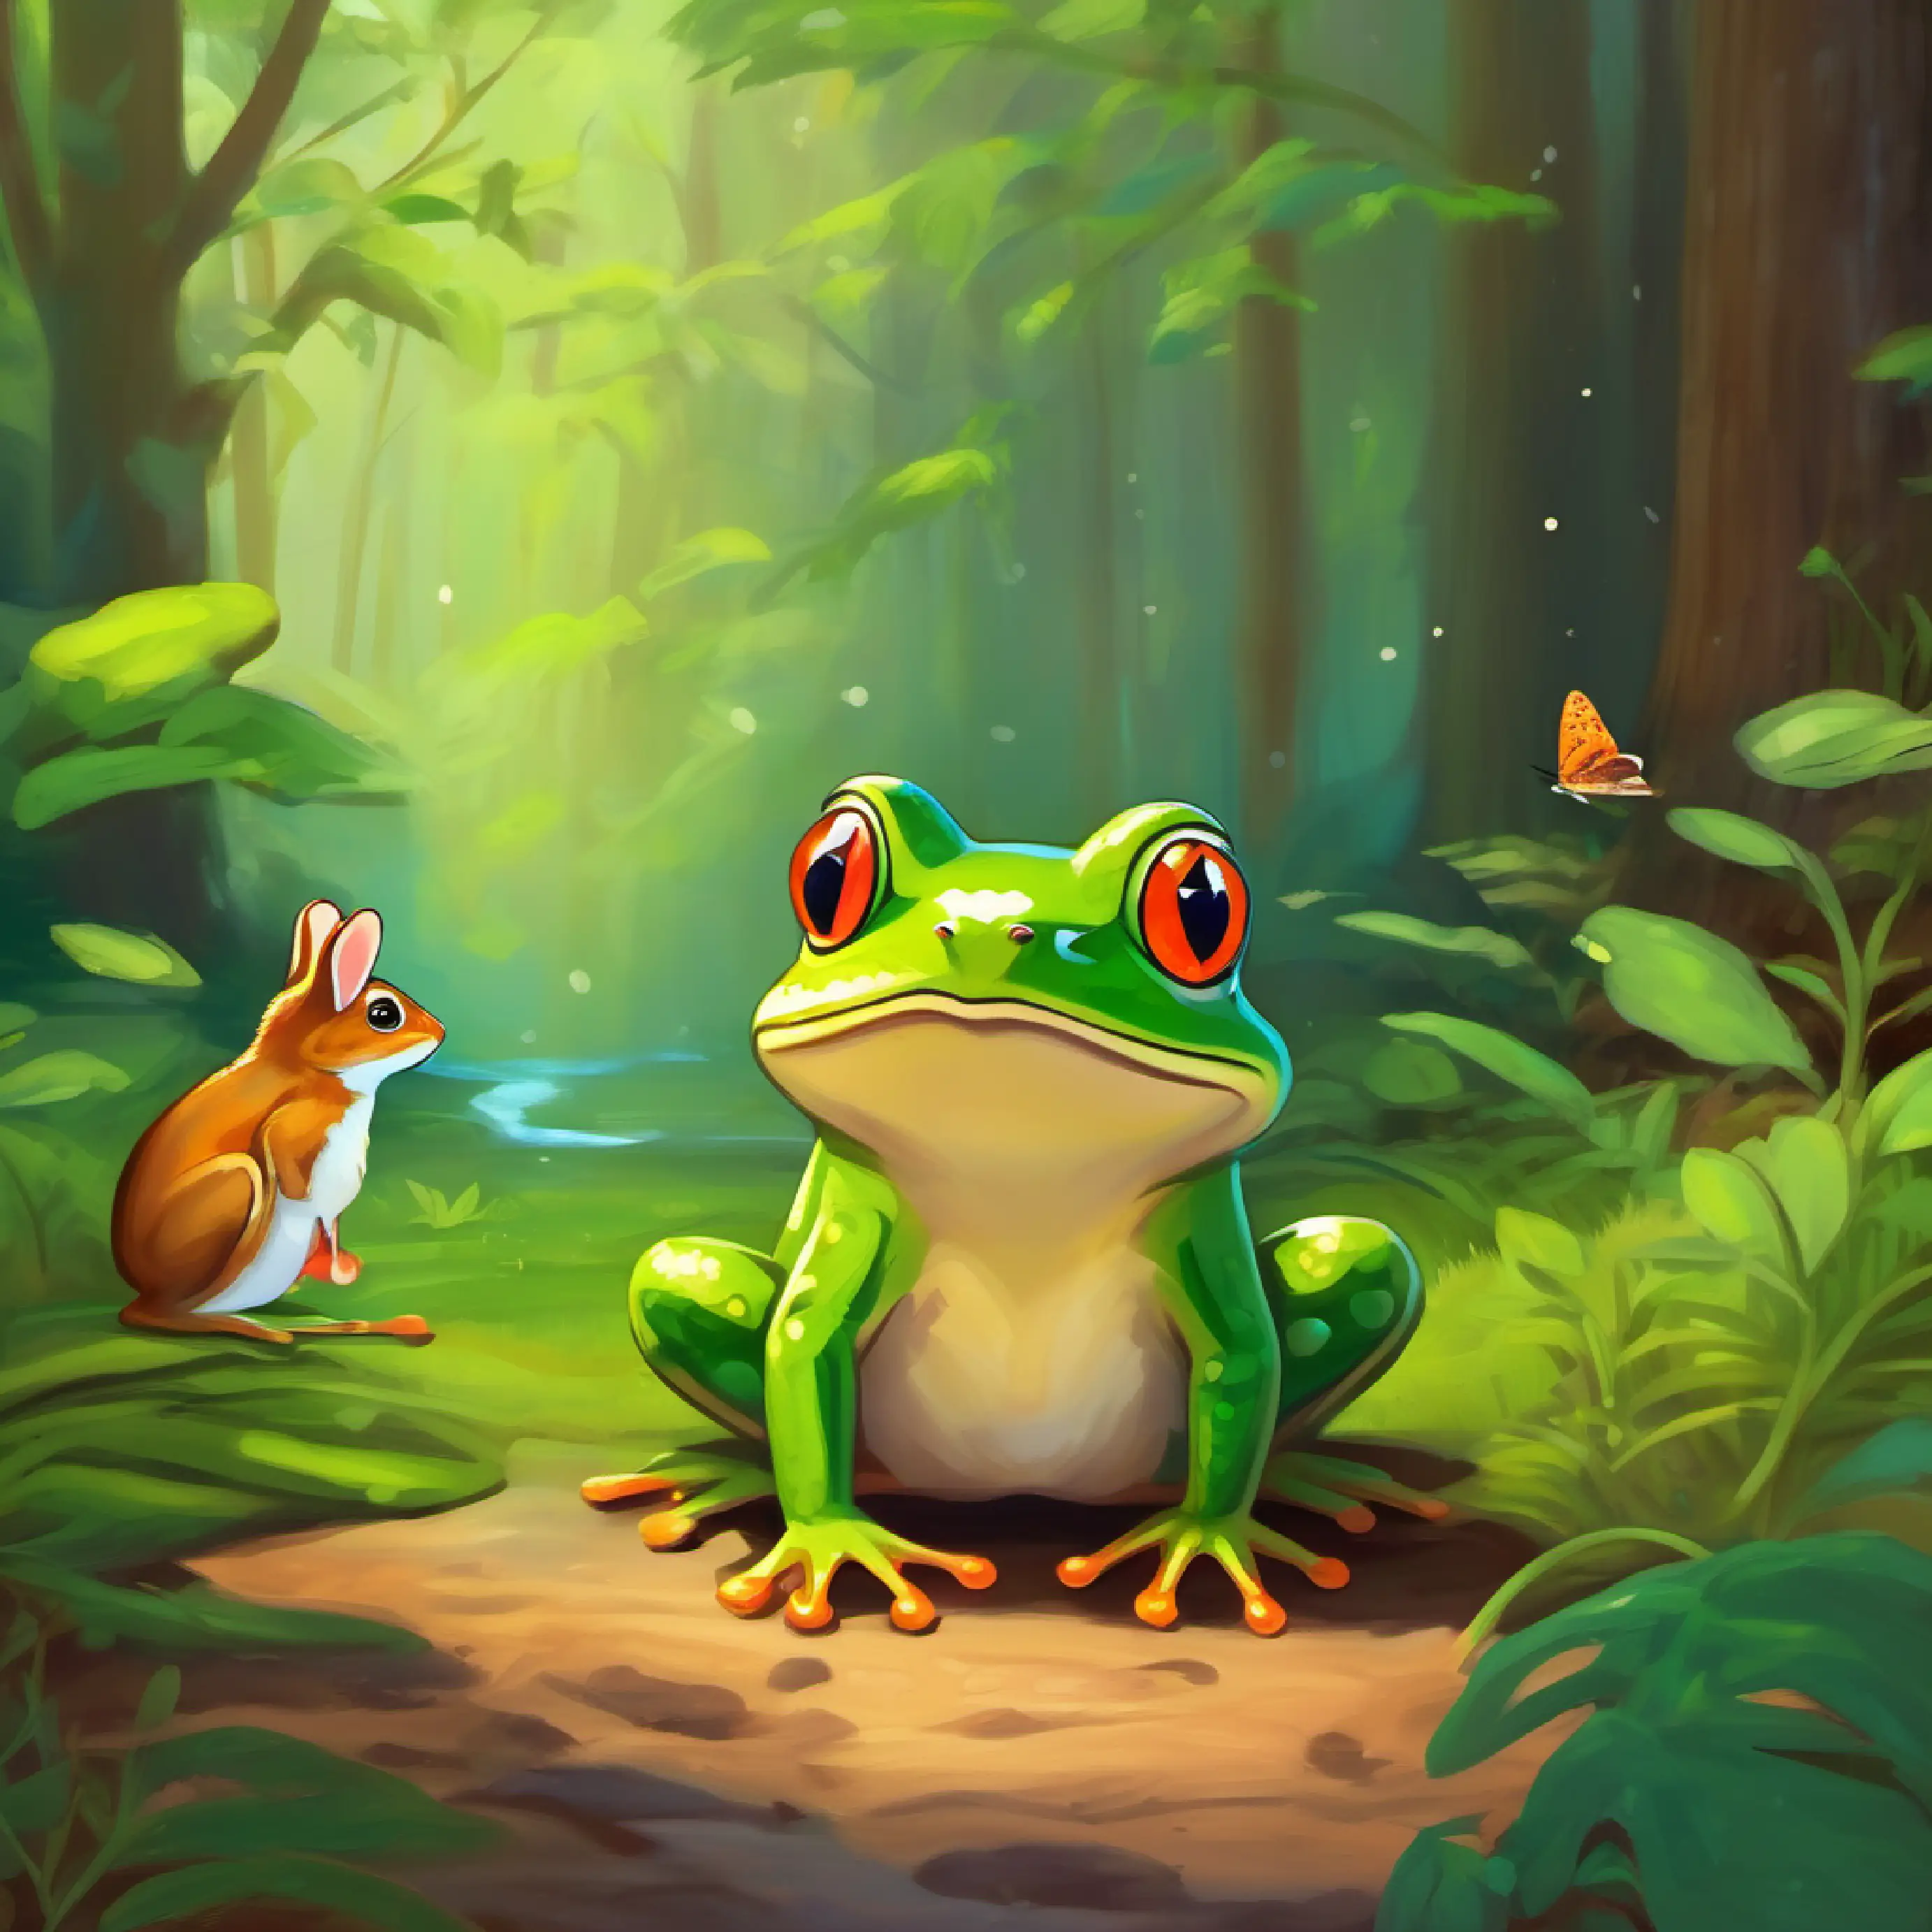 Introduces a frog teaching to the brown rabbit how to breathe and stay calm in the nature